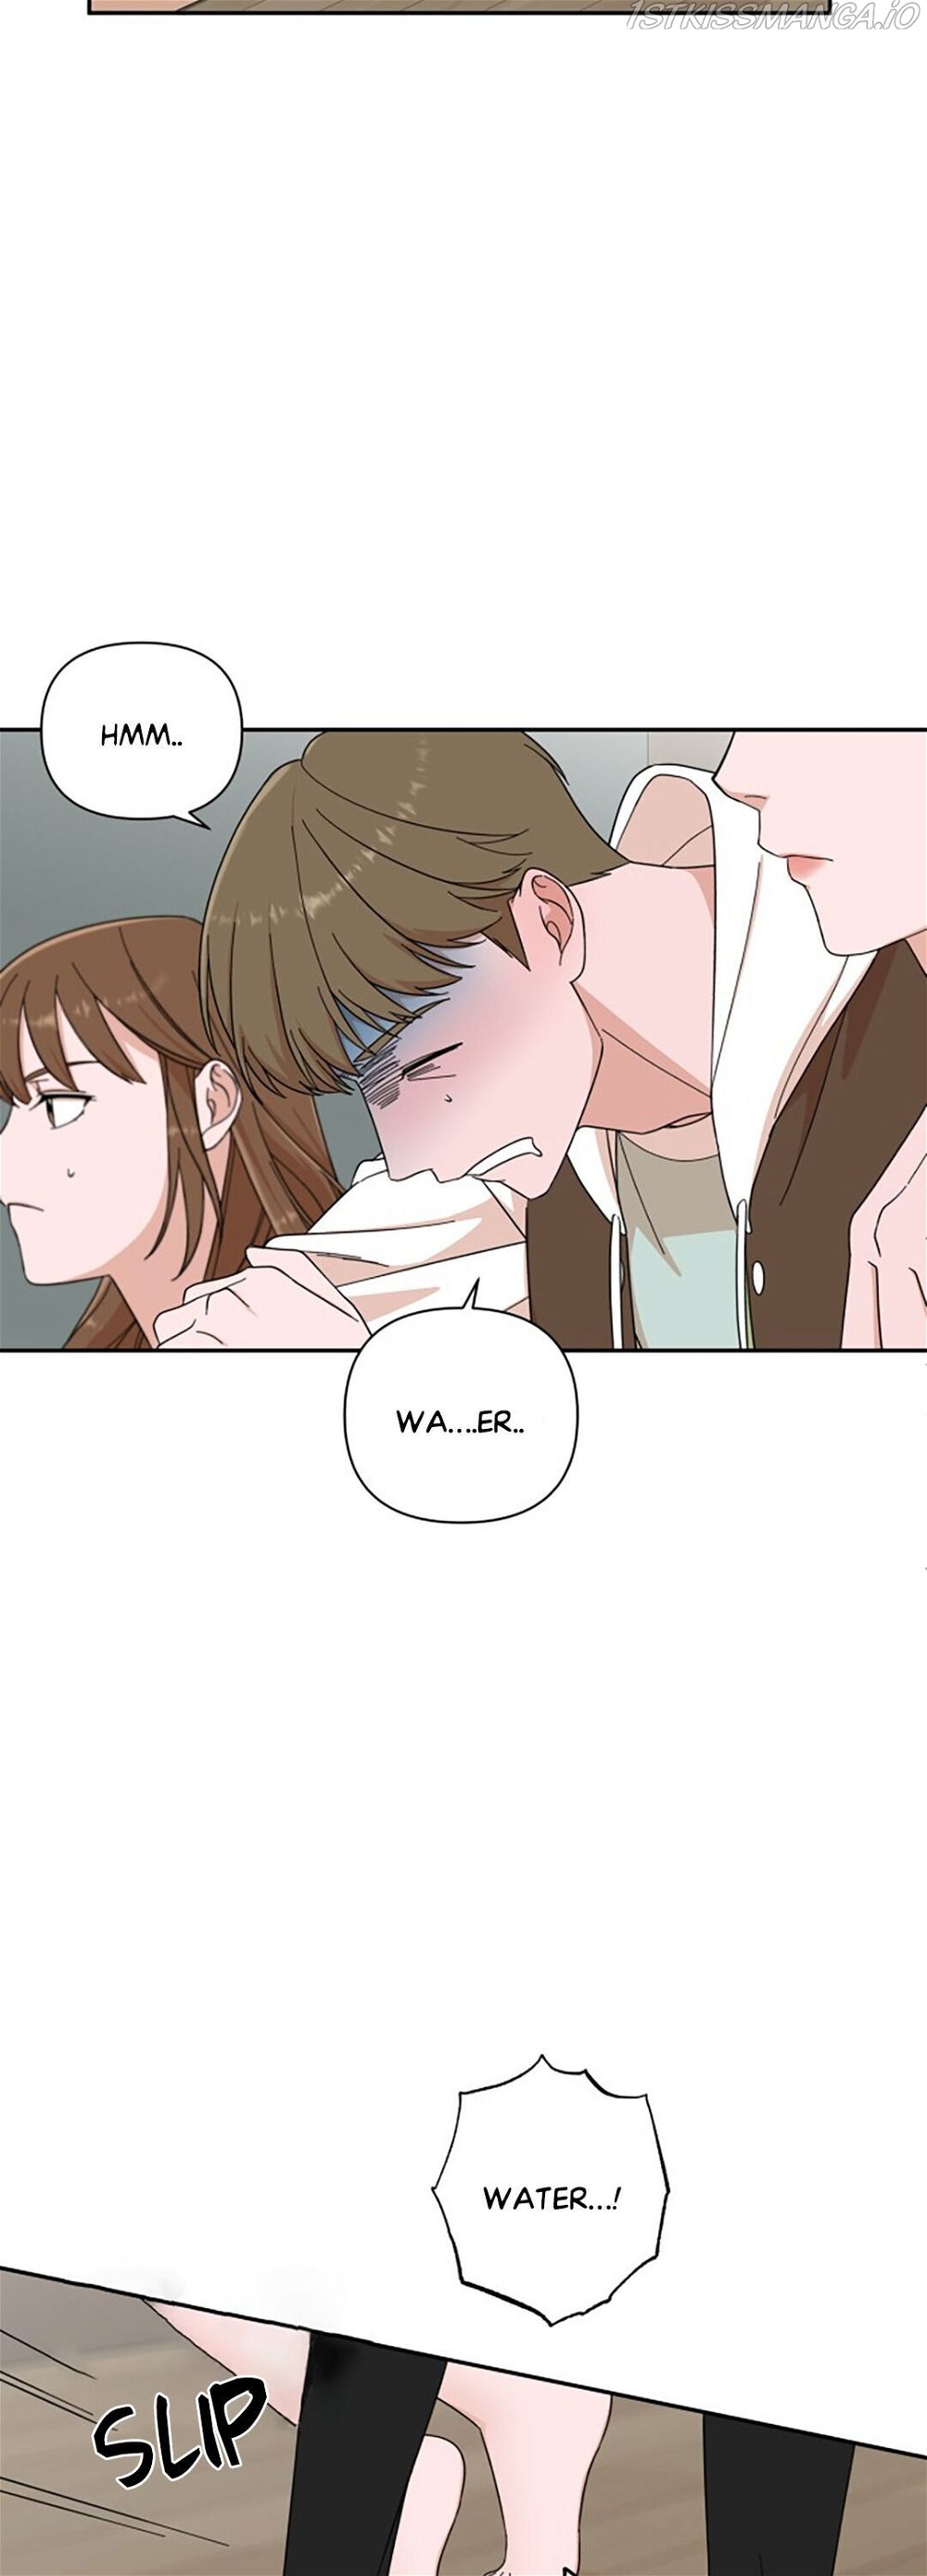 The Man with Pretty Lips Chapter 2 - Page 36